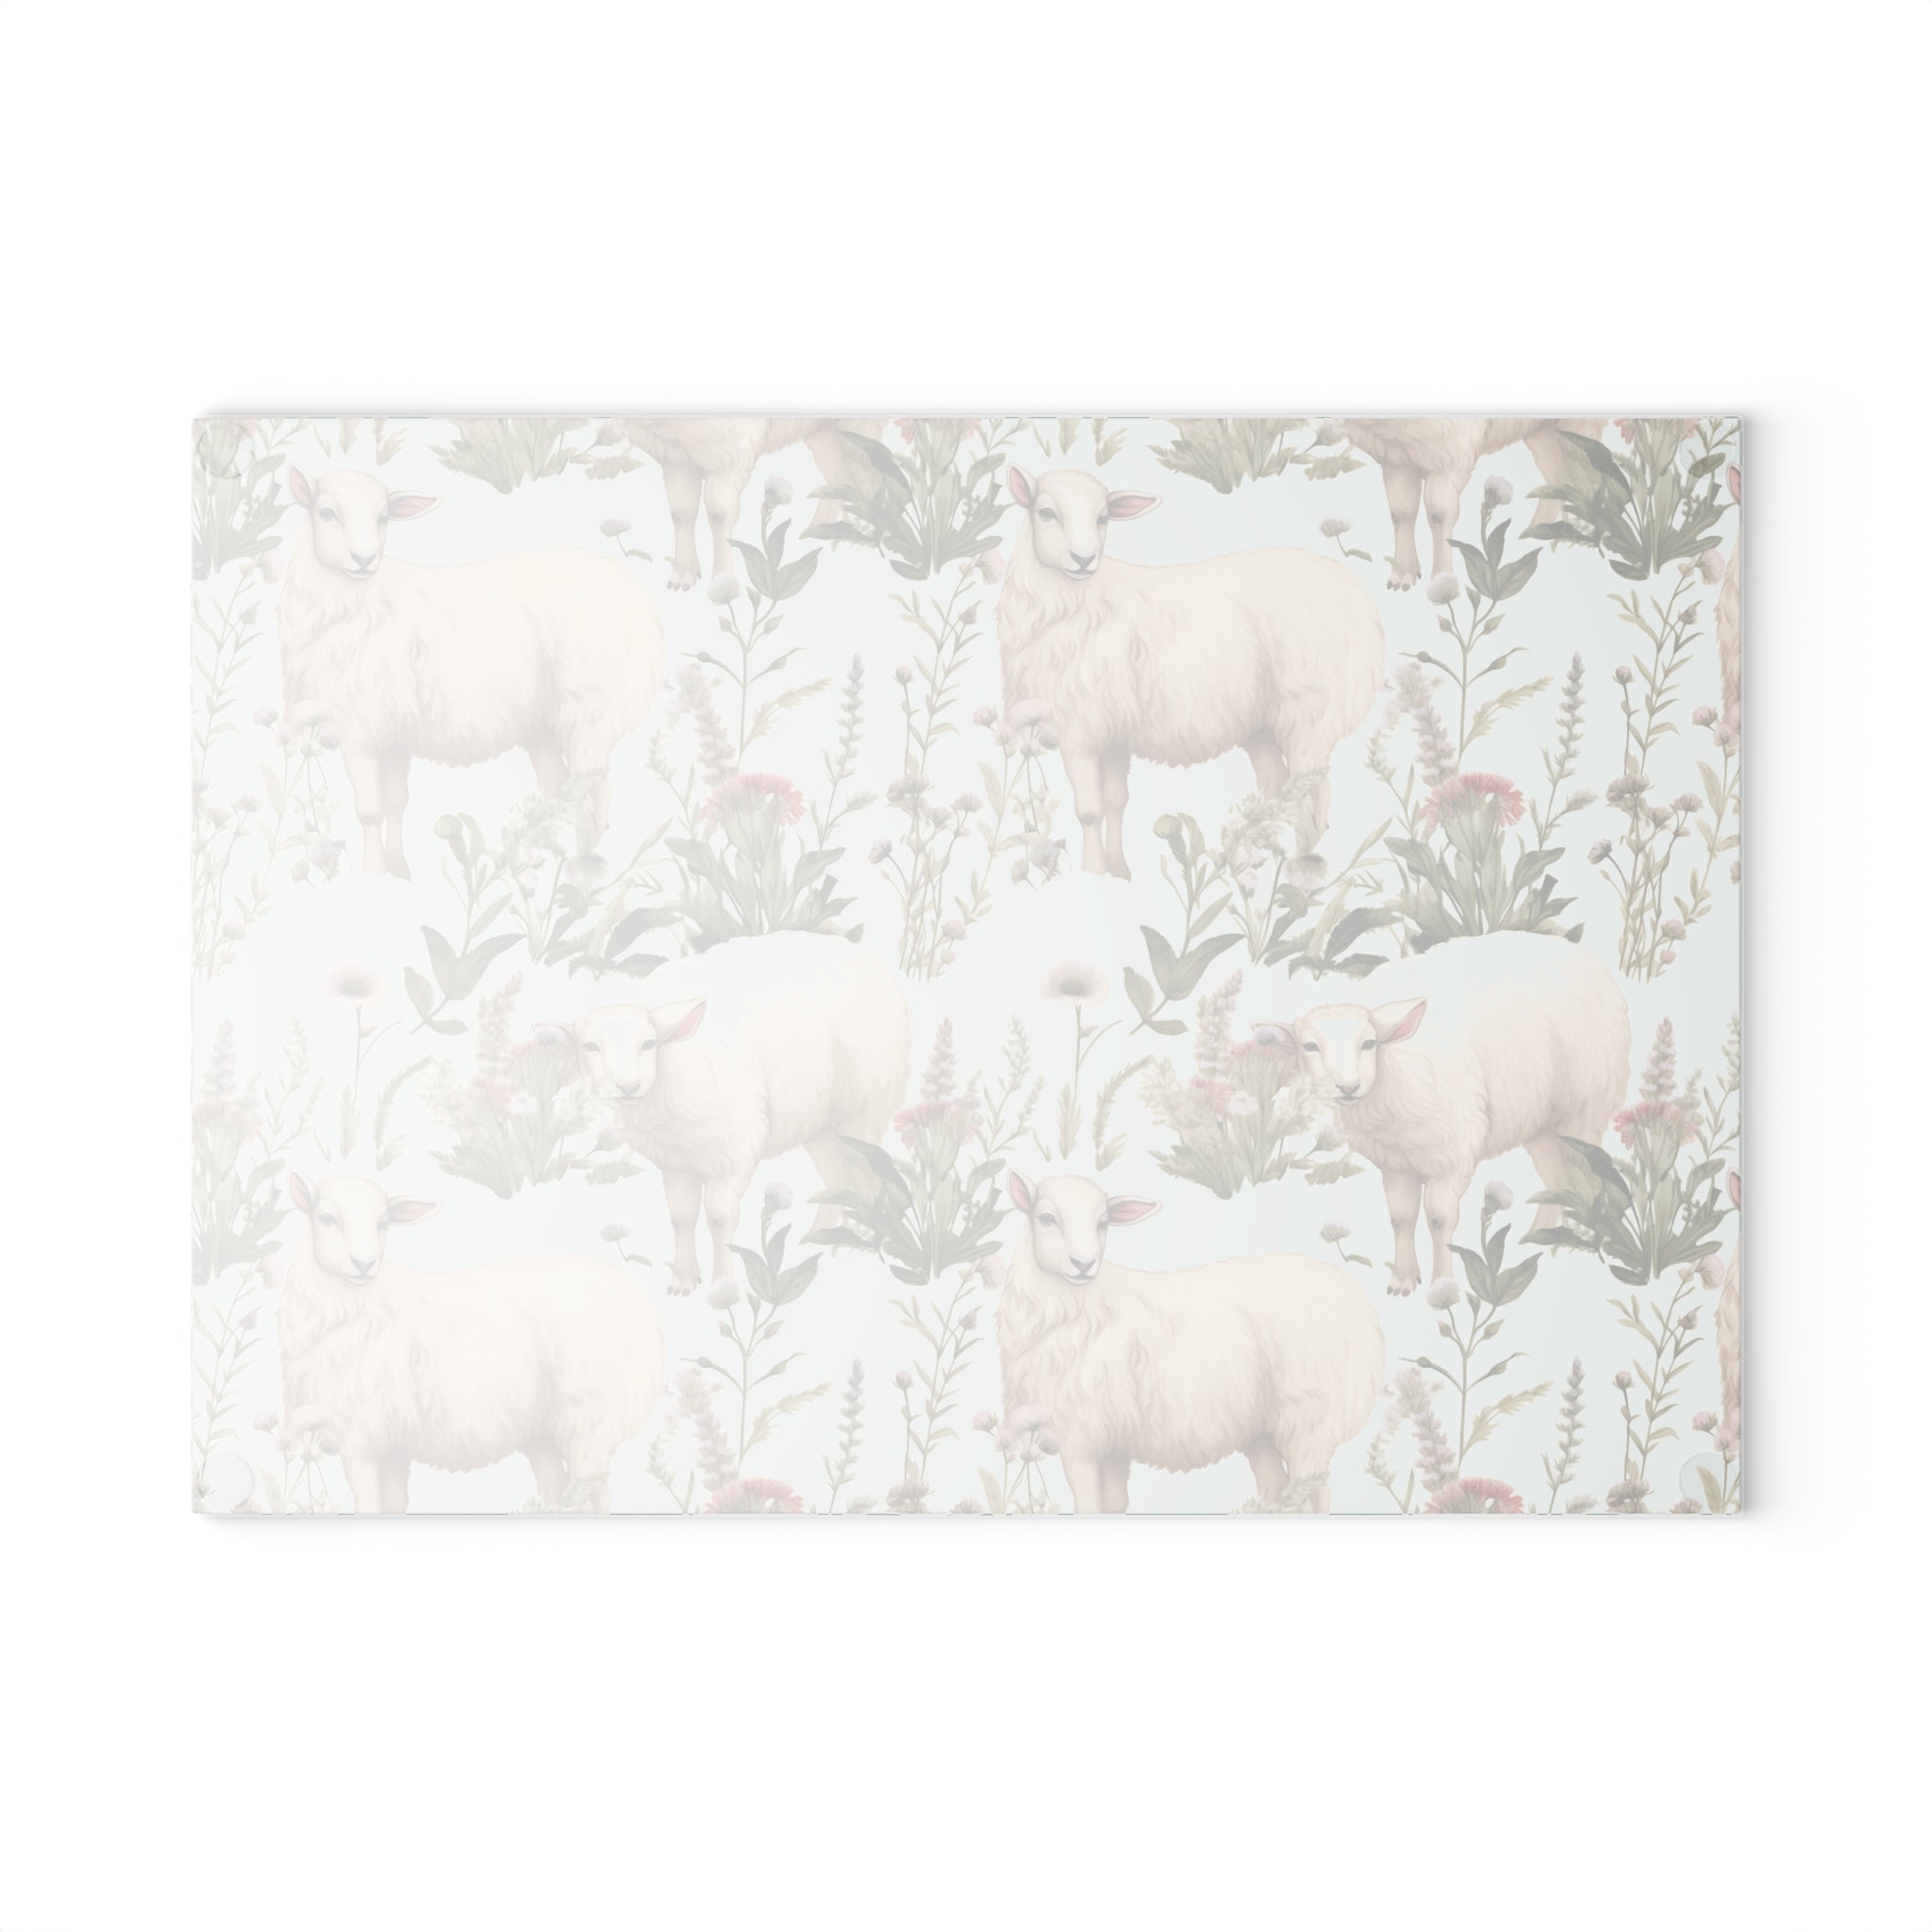 Country Rustic Sheep Glass Cutting Board - Kitchen Home Decor